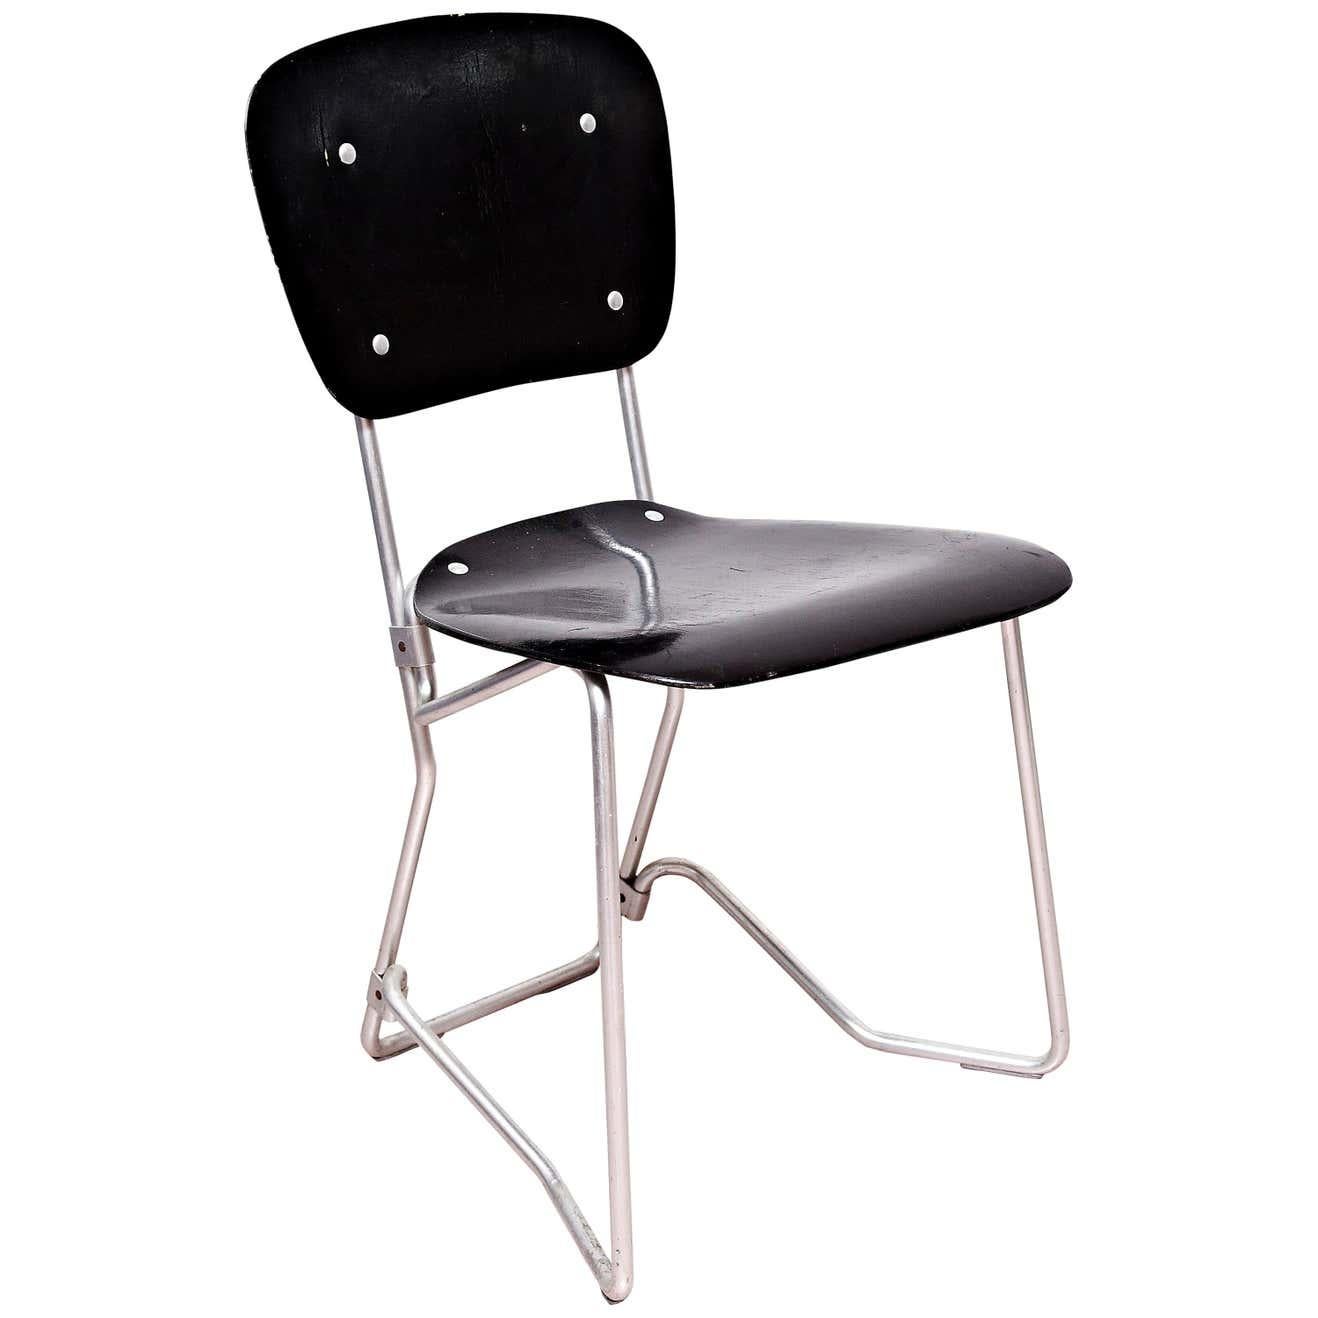 Armin Wirth Mid-Century Modern Metal and Wood Swiss Stackable Chairs for Aluflex 6